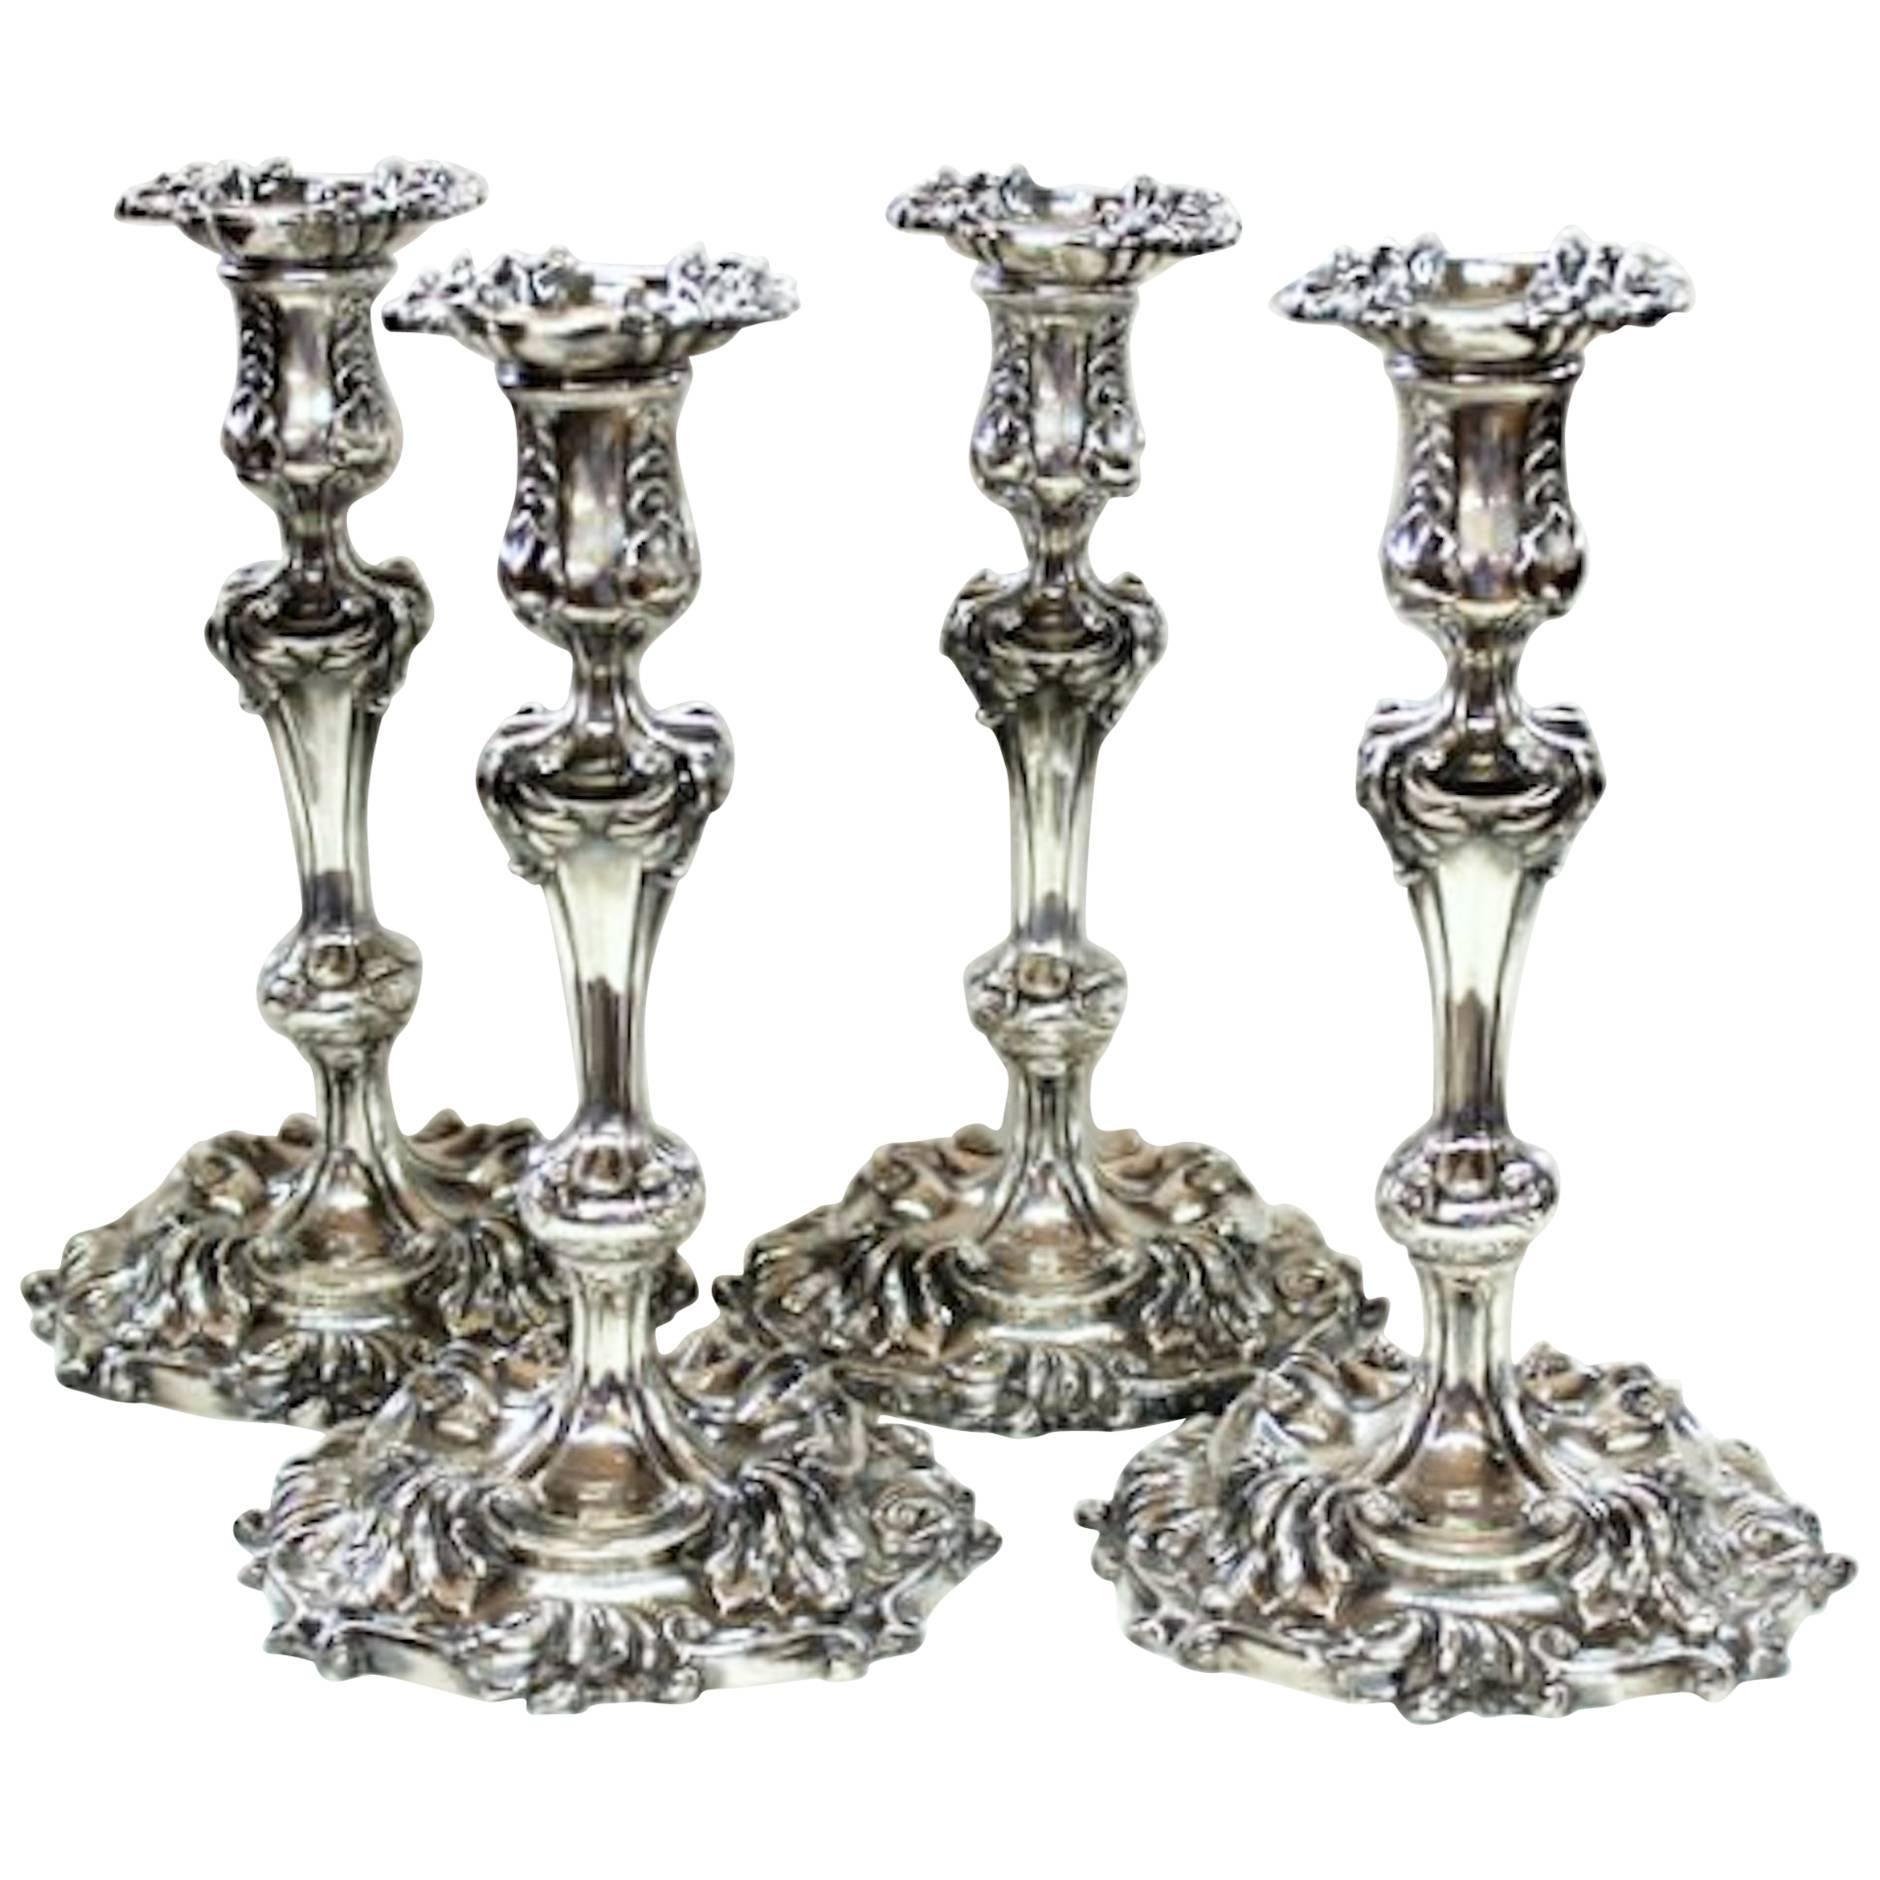 Set of Four Superb Antique Tiffany & Co. Silver Plate Rococo Style Candlesticks